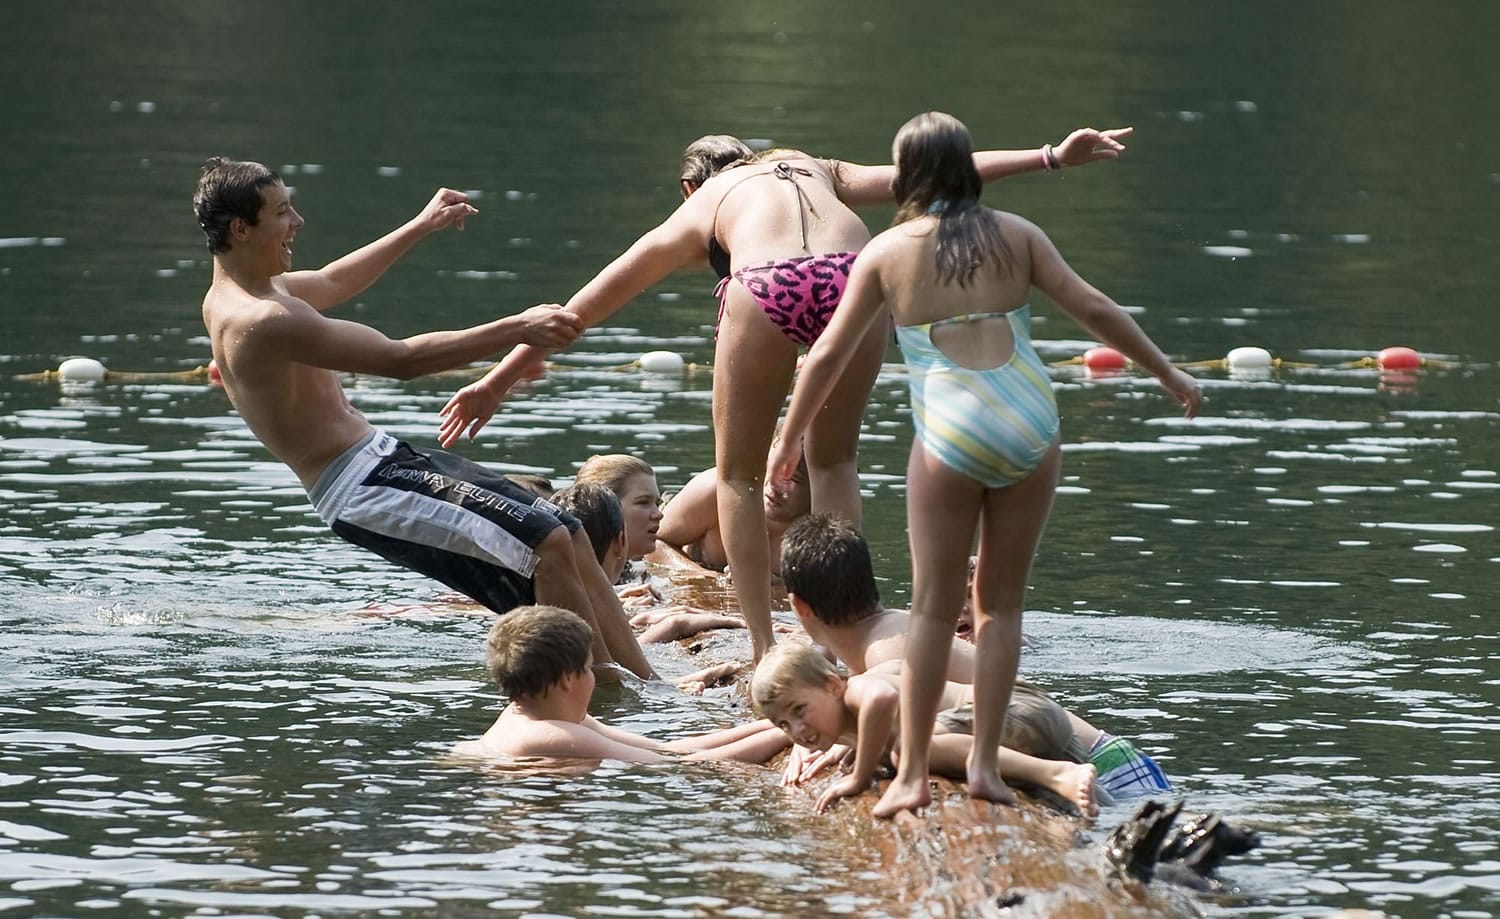 Swimmers determine who has the best balance on a floating log in the lake's swimming area.